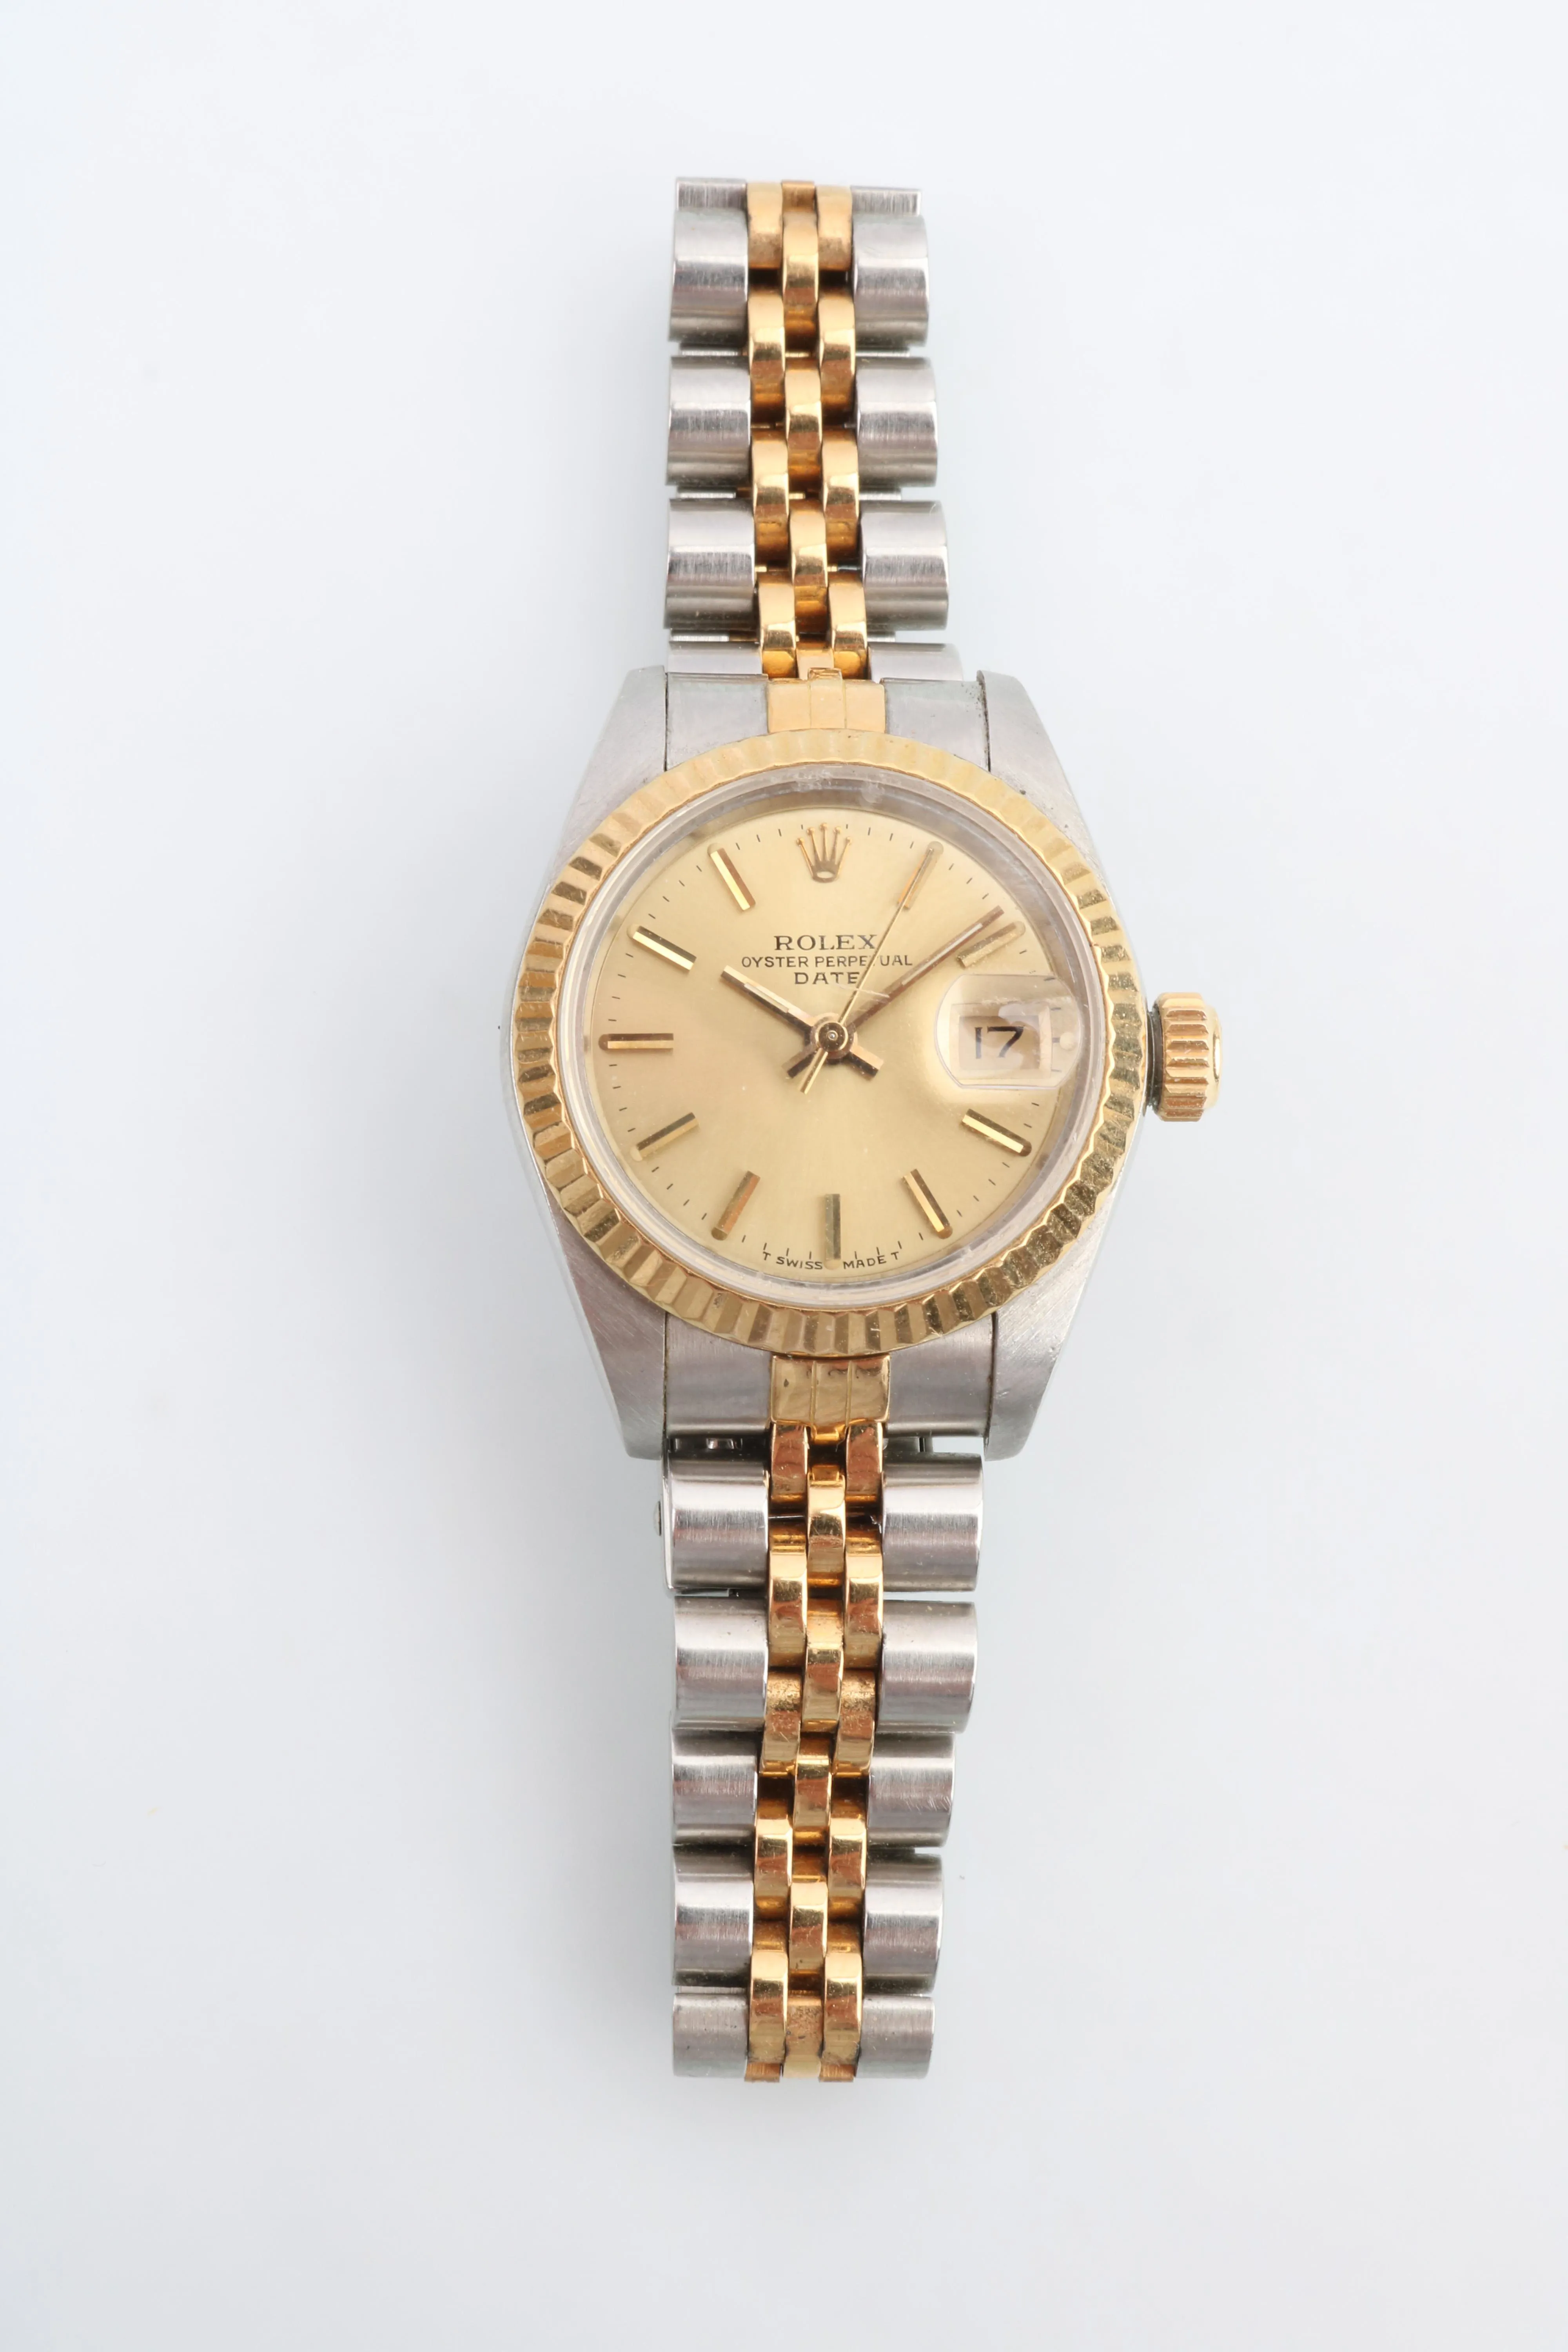 Rolex Lady-Datejust 69173 26mm Yellow gold and stainless steel Gold-coloured 3